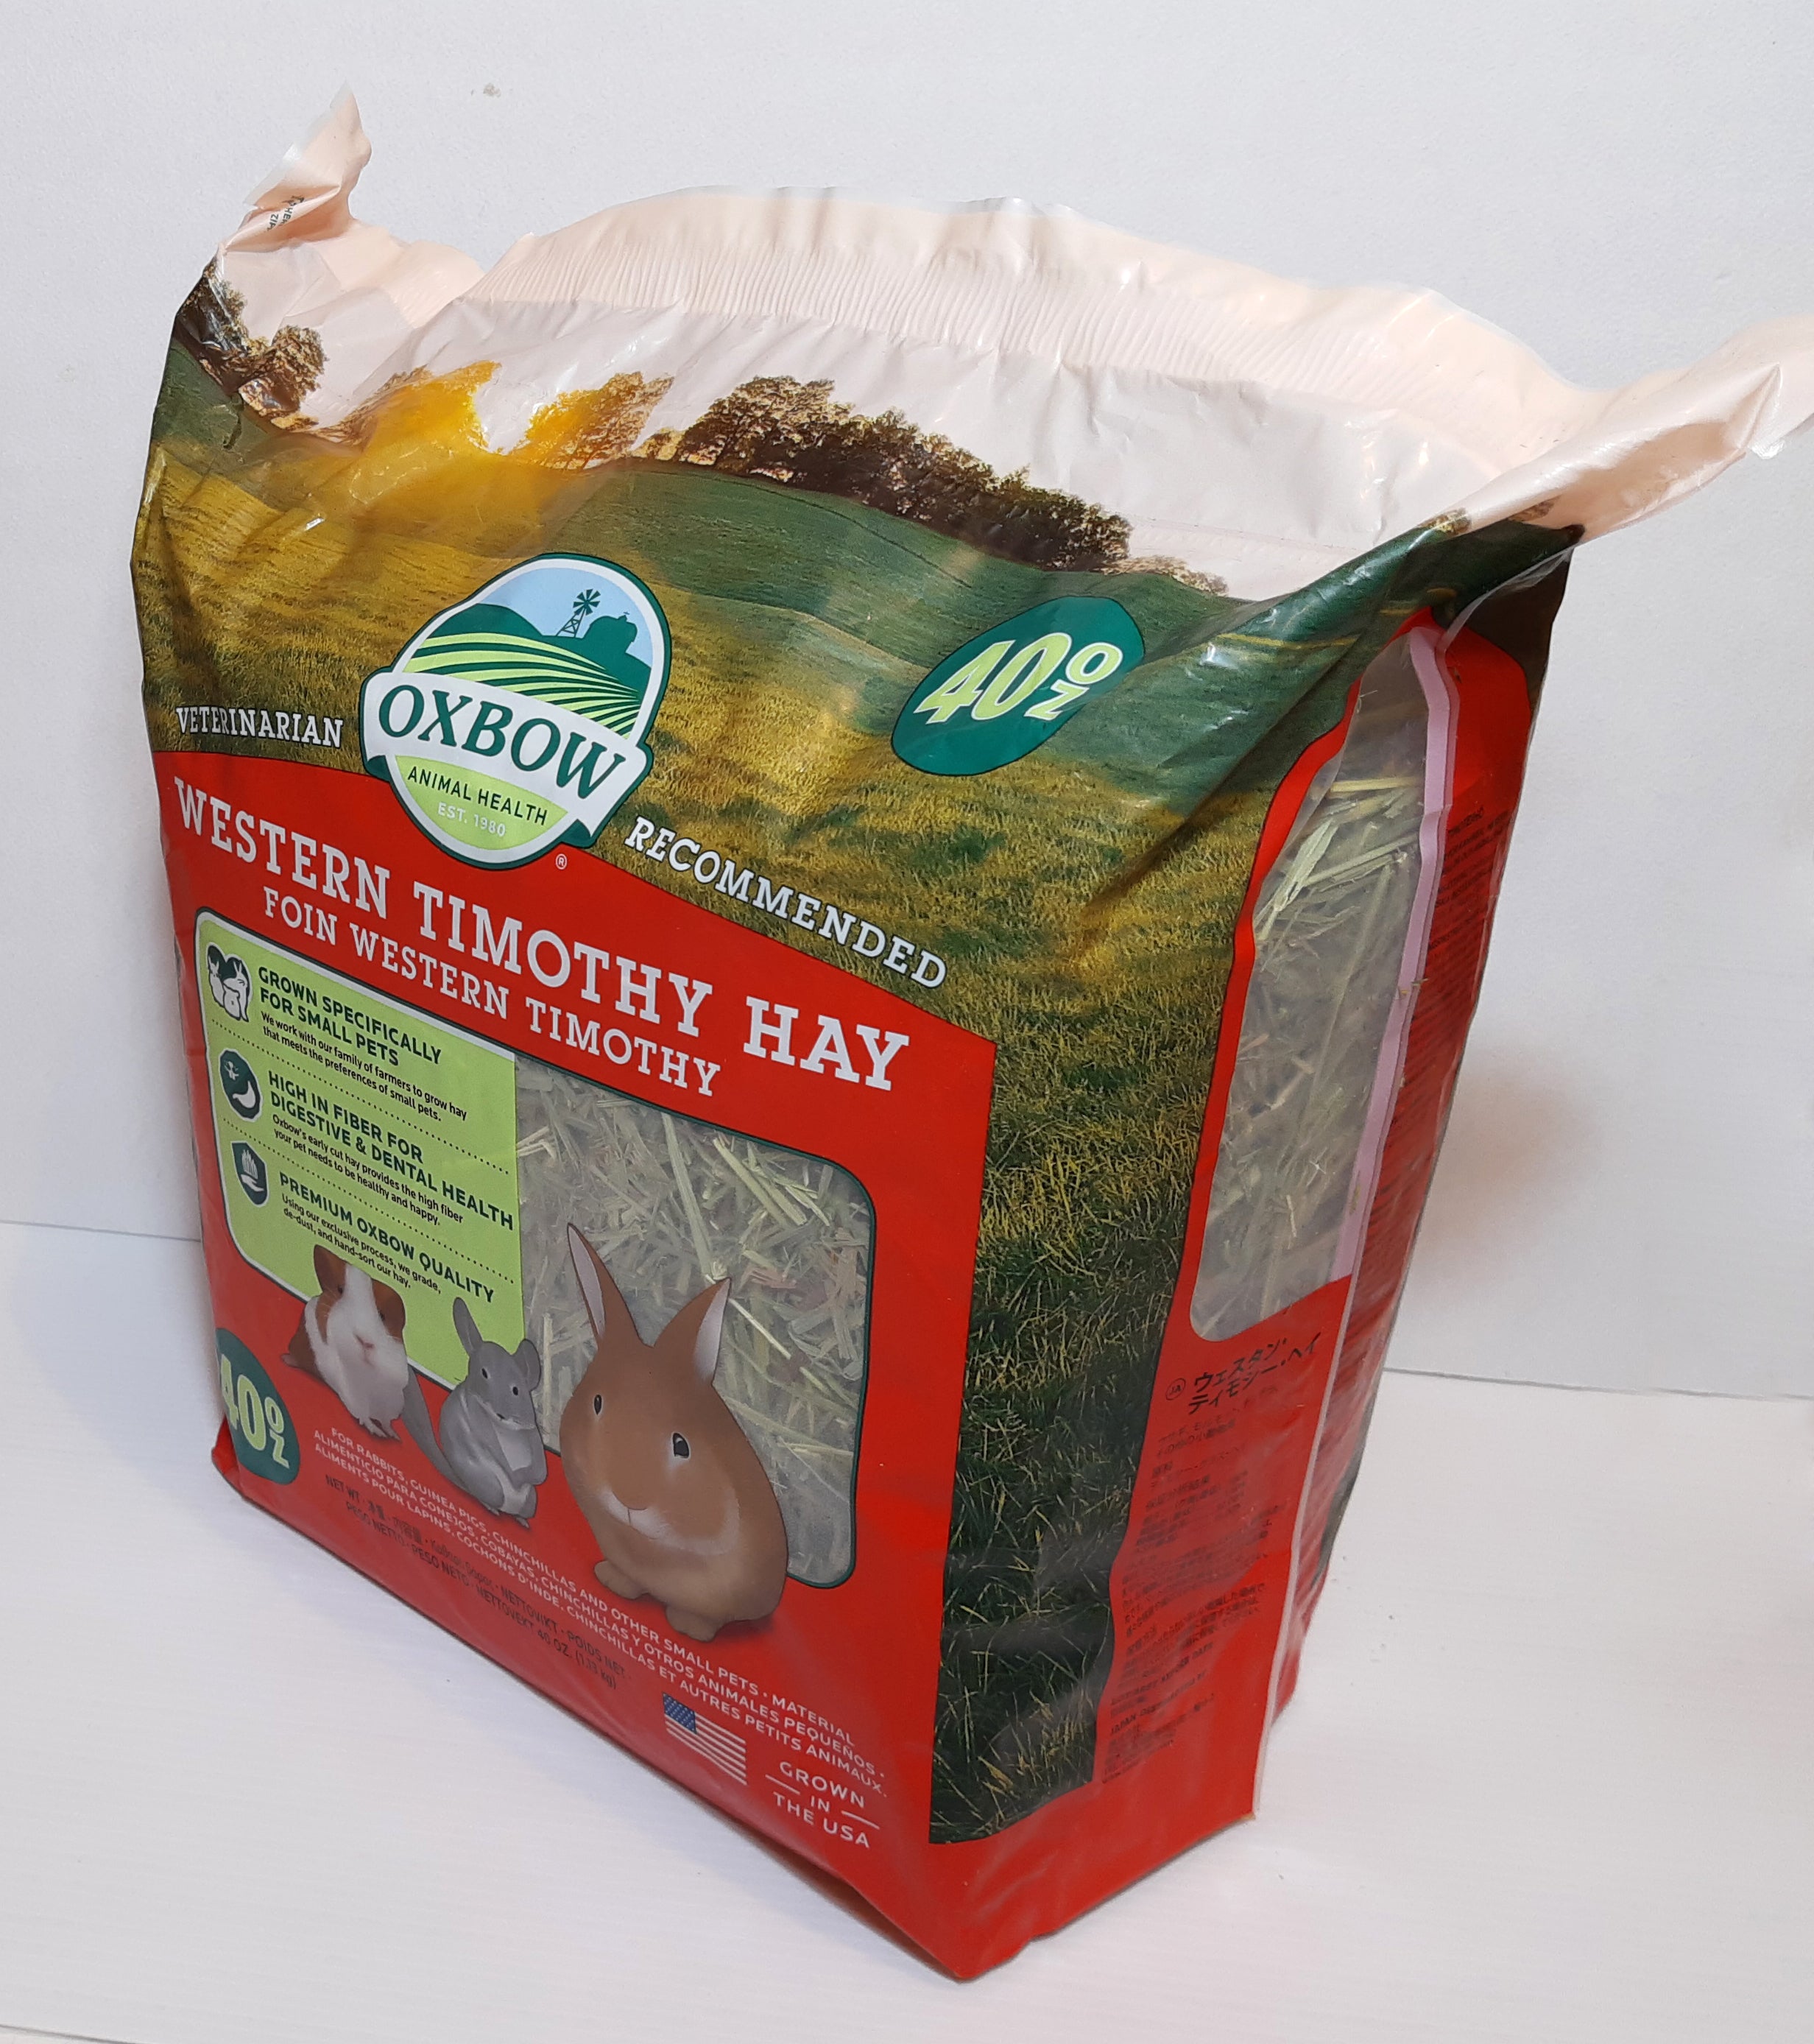 Timothy Hay Oxbow 1.13 Kg